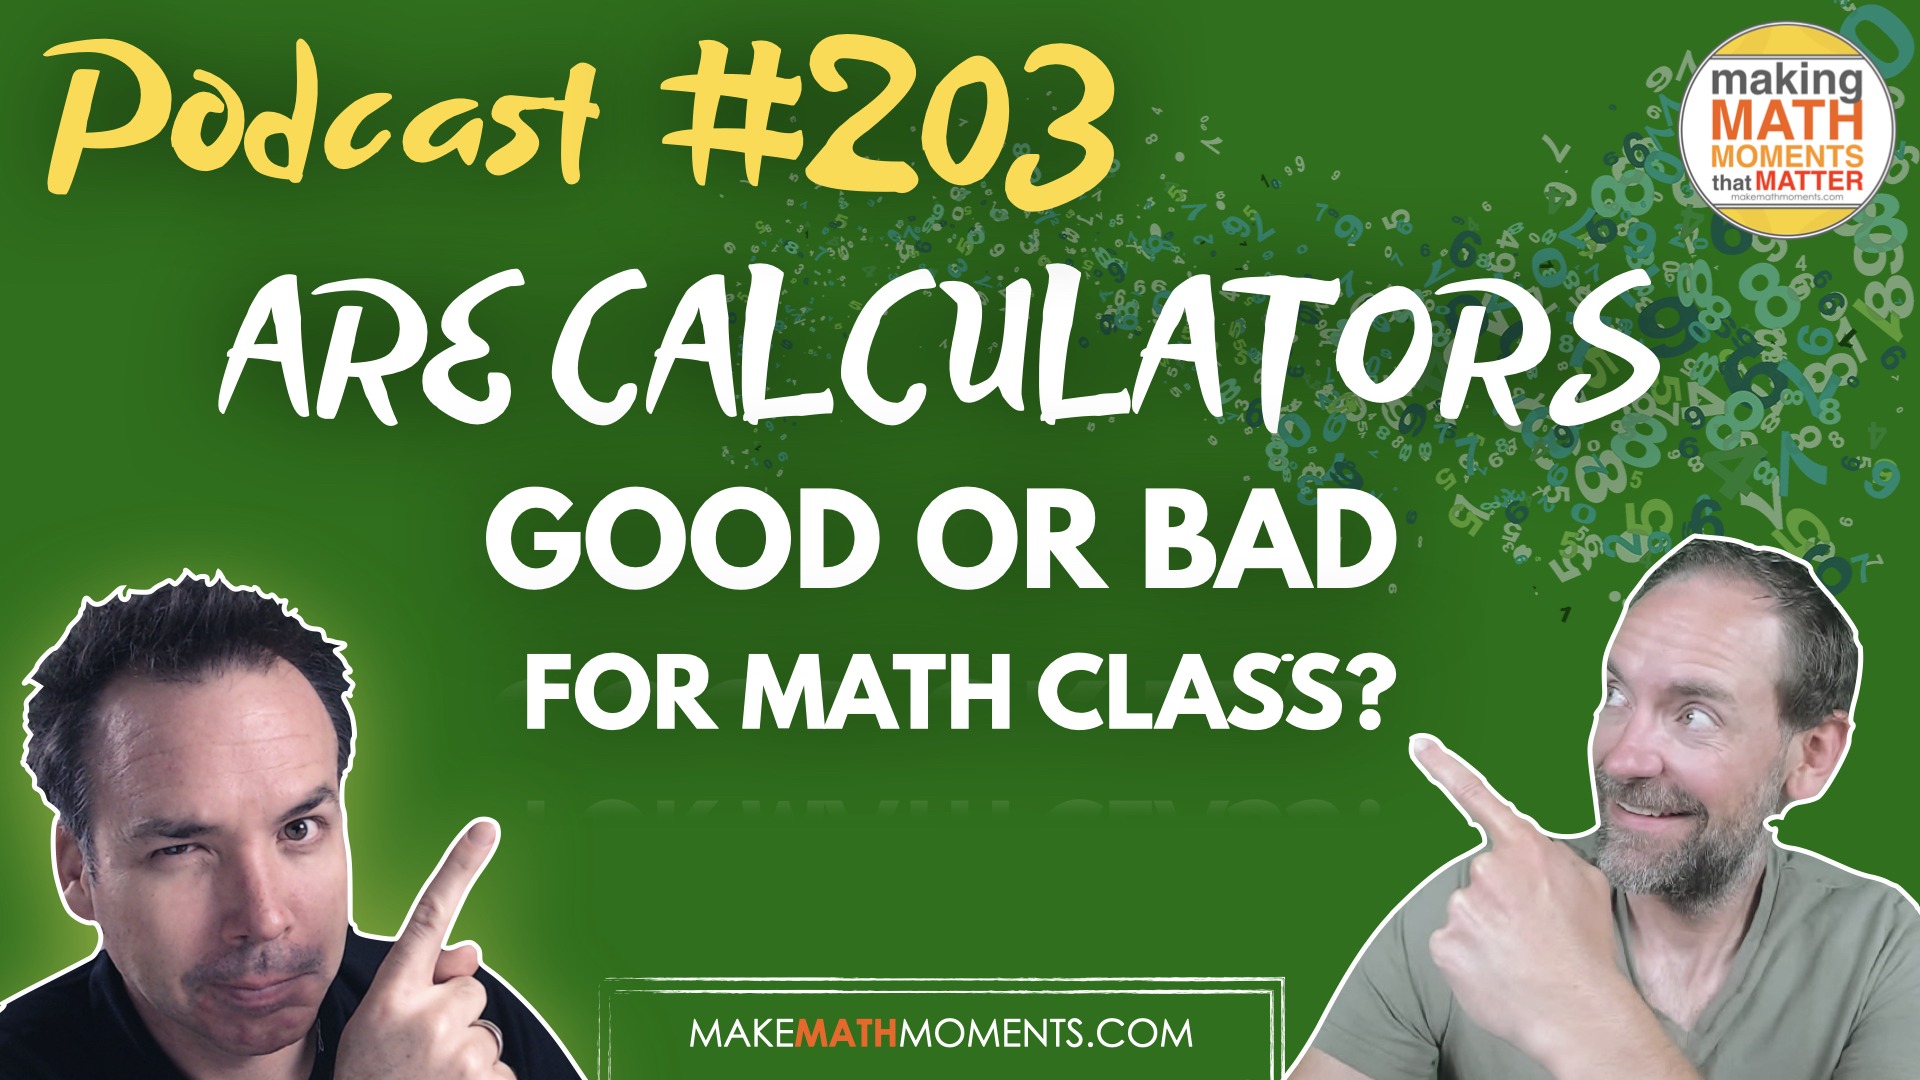 Episode 203: Are Calculators Good or Bad For Math Class?